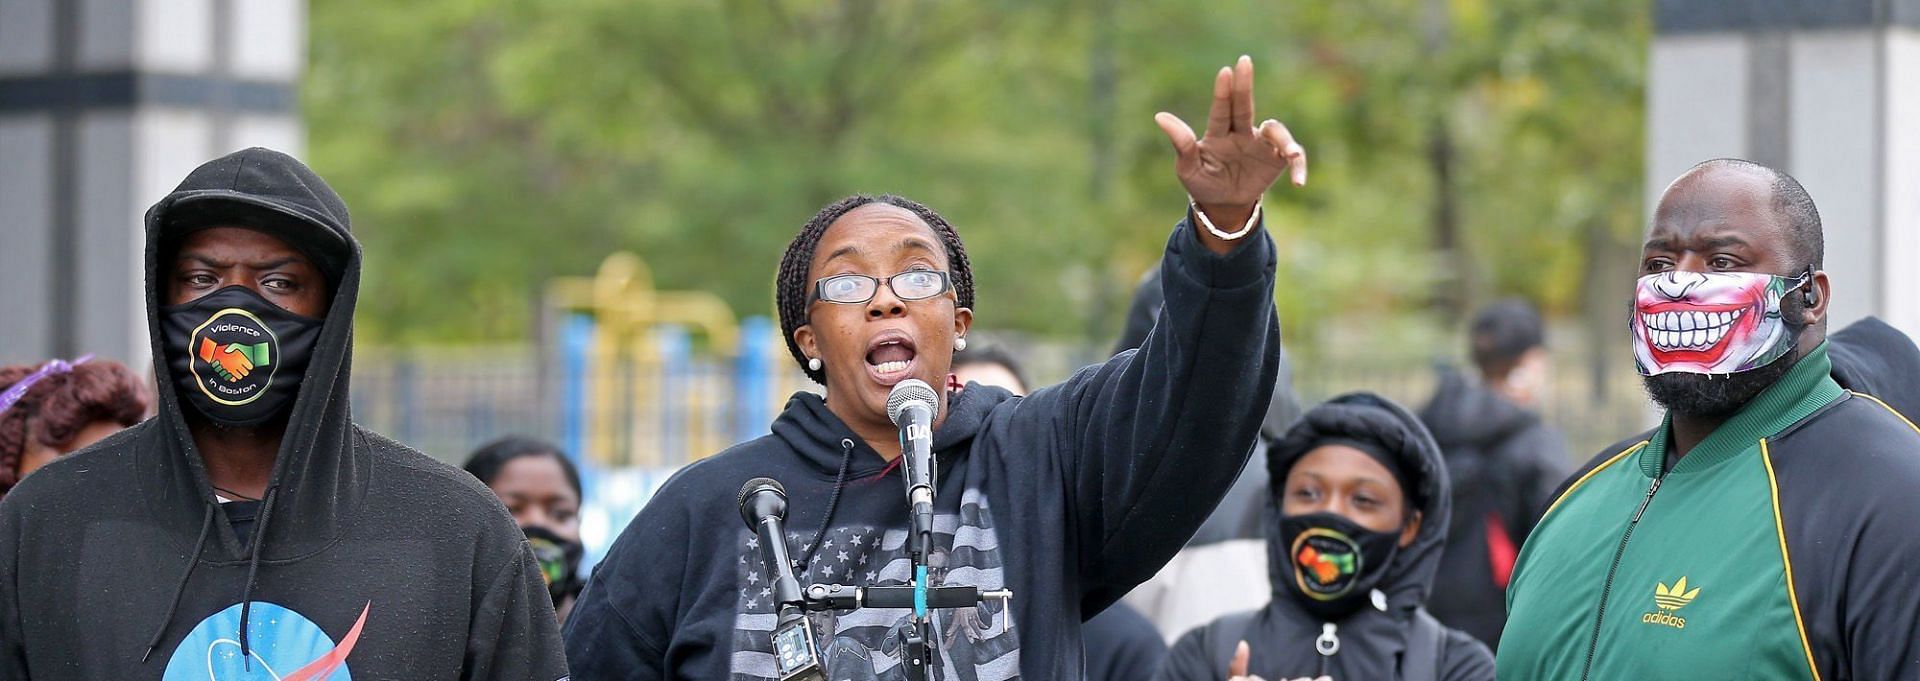 Monica Cannon Grant is an activist and community organizer from Boston (Image via Matt Stone/Getty Images)